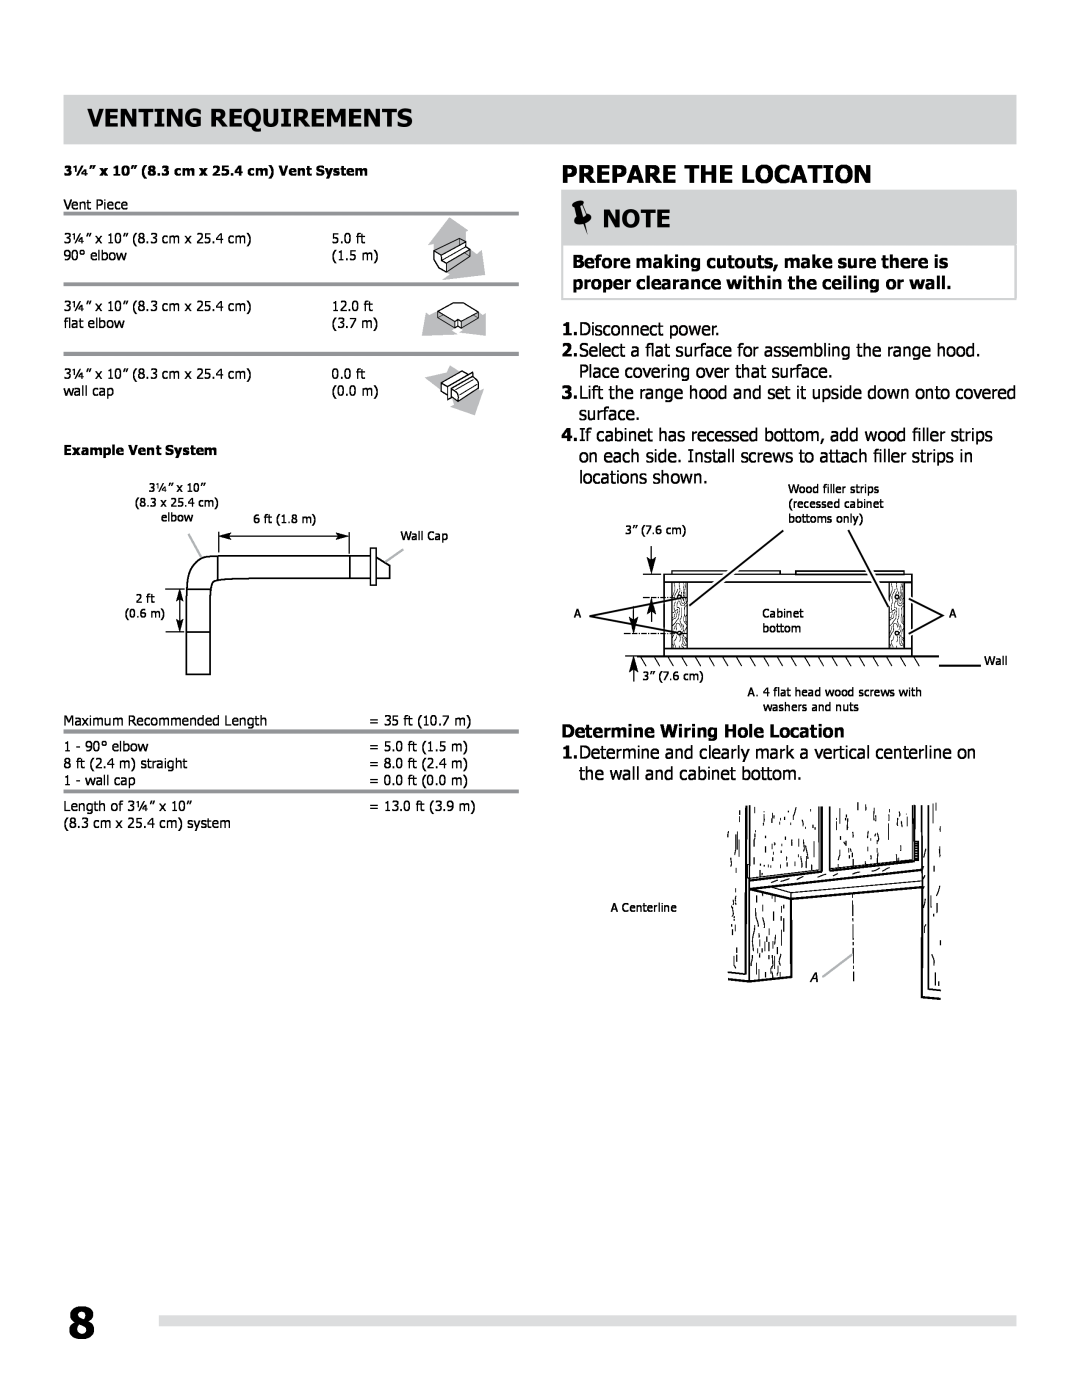 Frigidaire LI30MB manual Prepare The Location, Determine Wiring Hole Location, Venting Requirements 